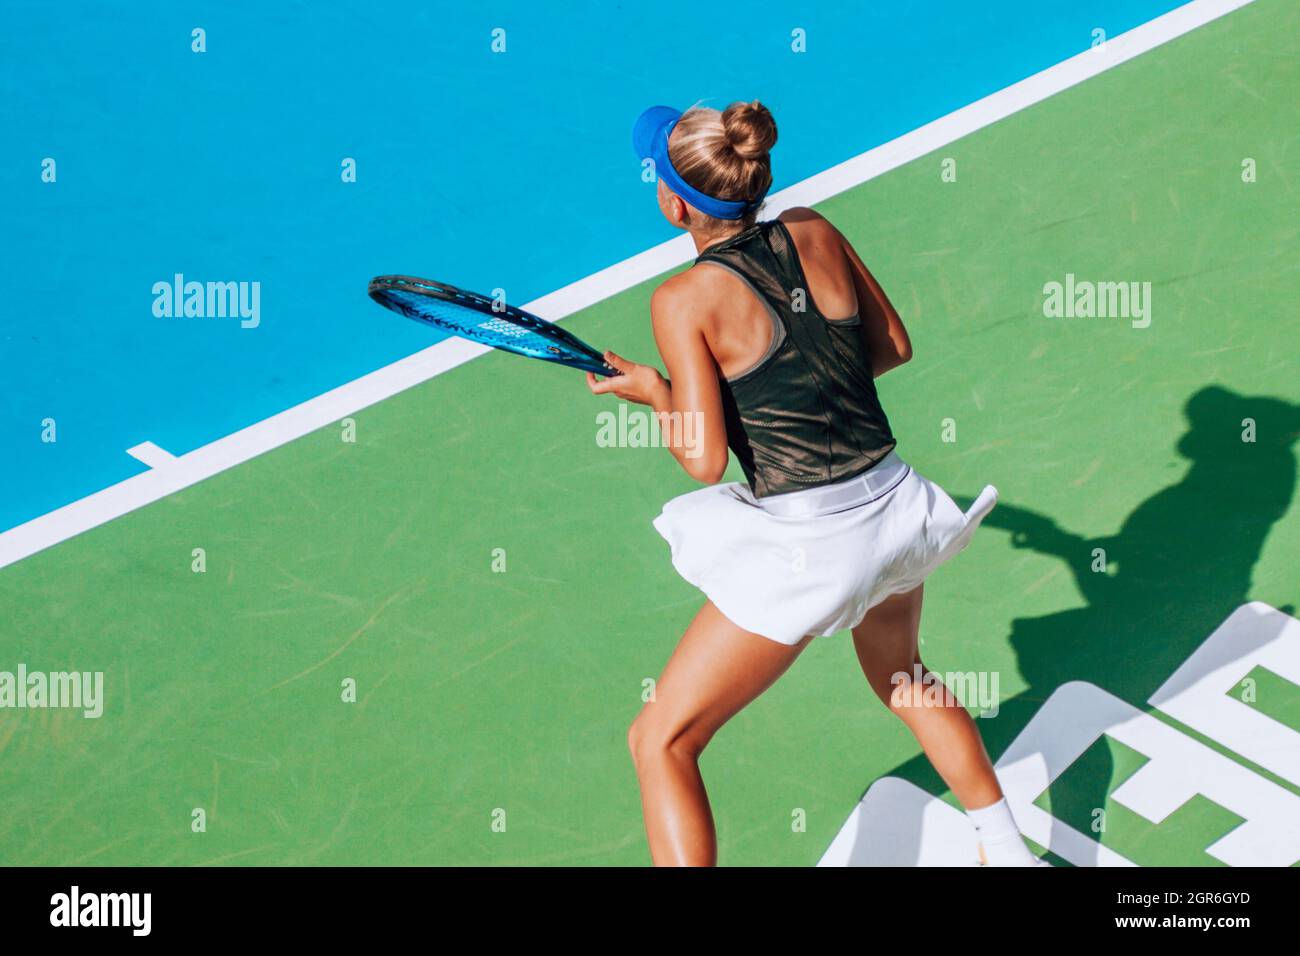 Girl Playing Tennis, Competitive Sport, Action Shot Stock Photo